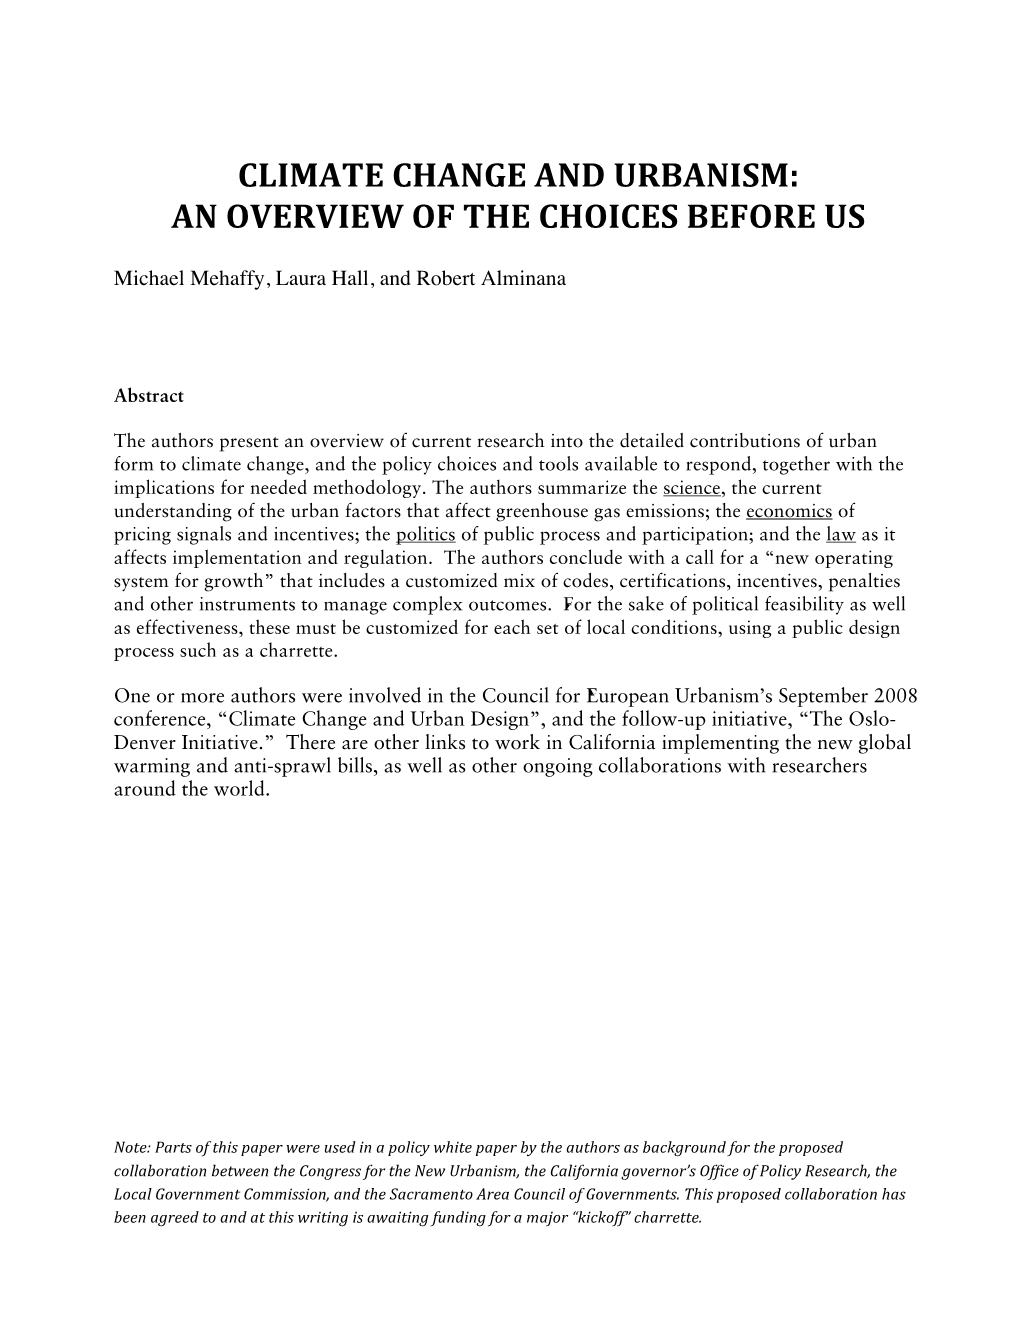 Climate Change and Urbanism: an Overview of the Choices Before Us